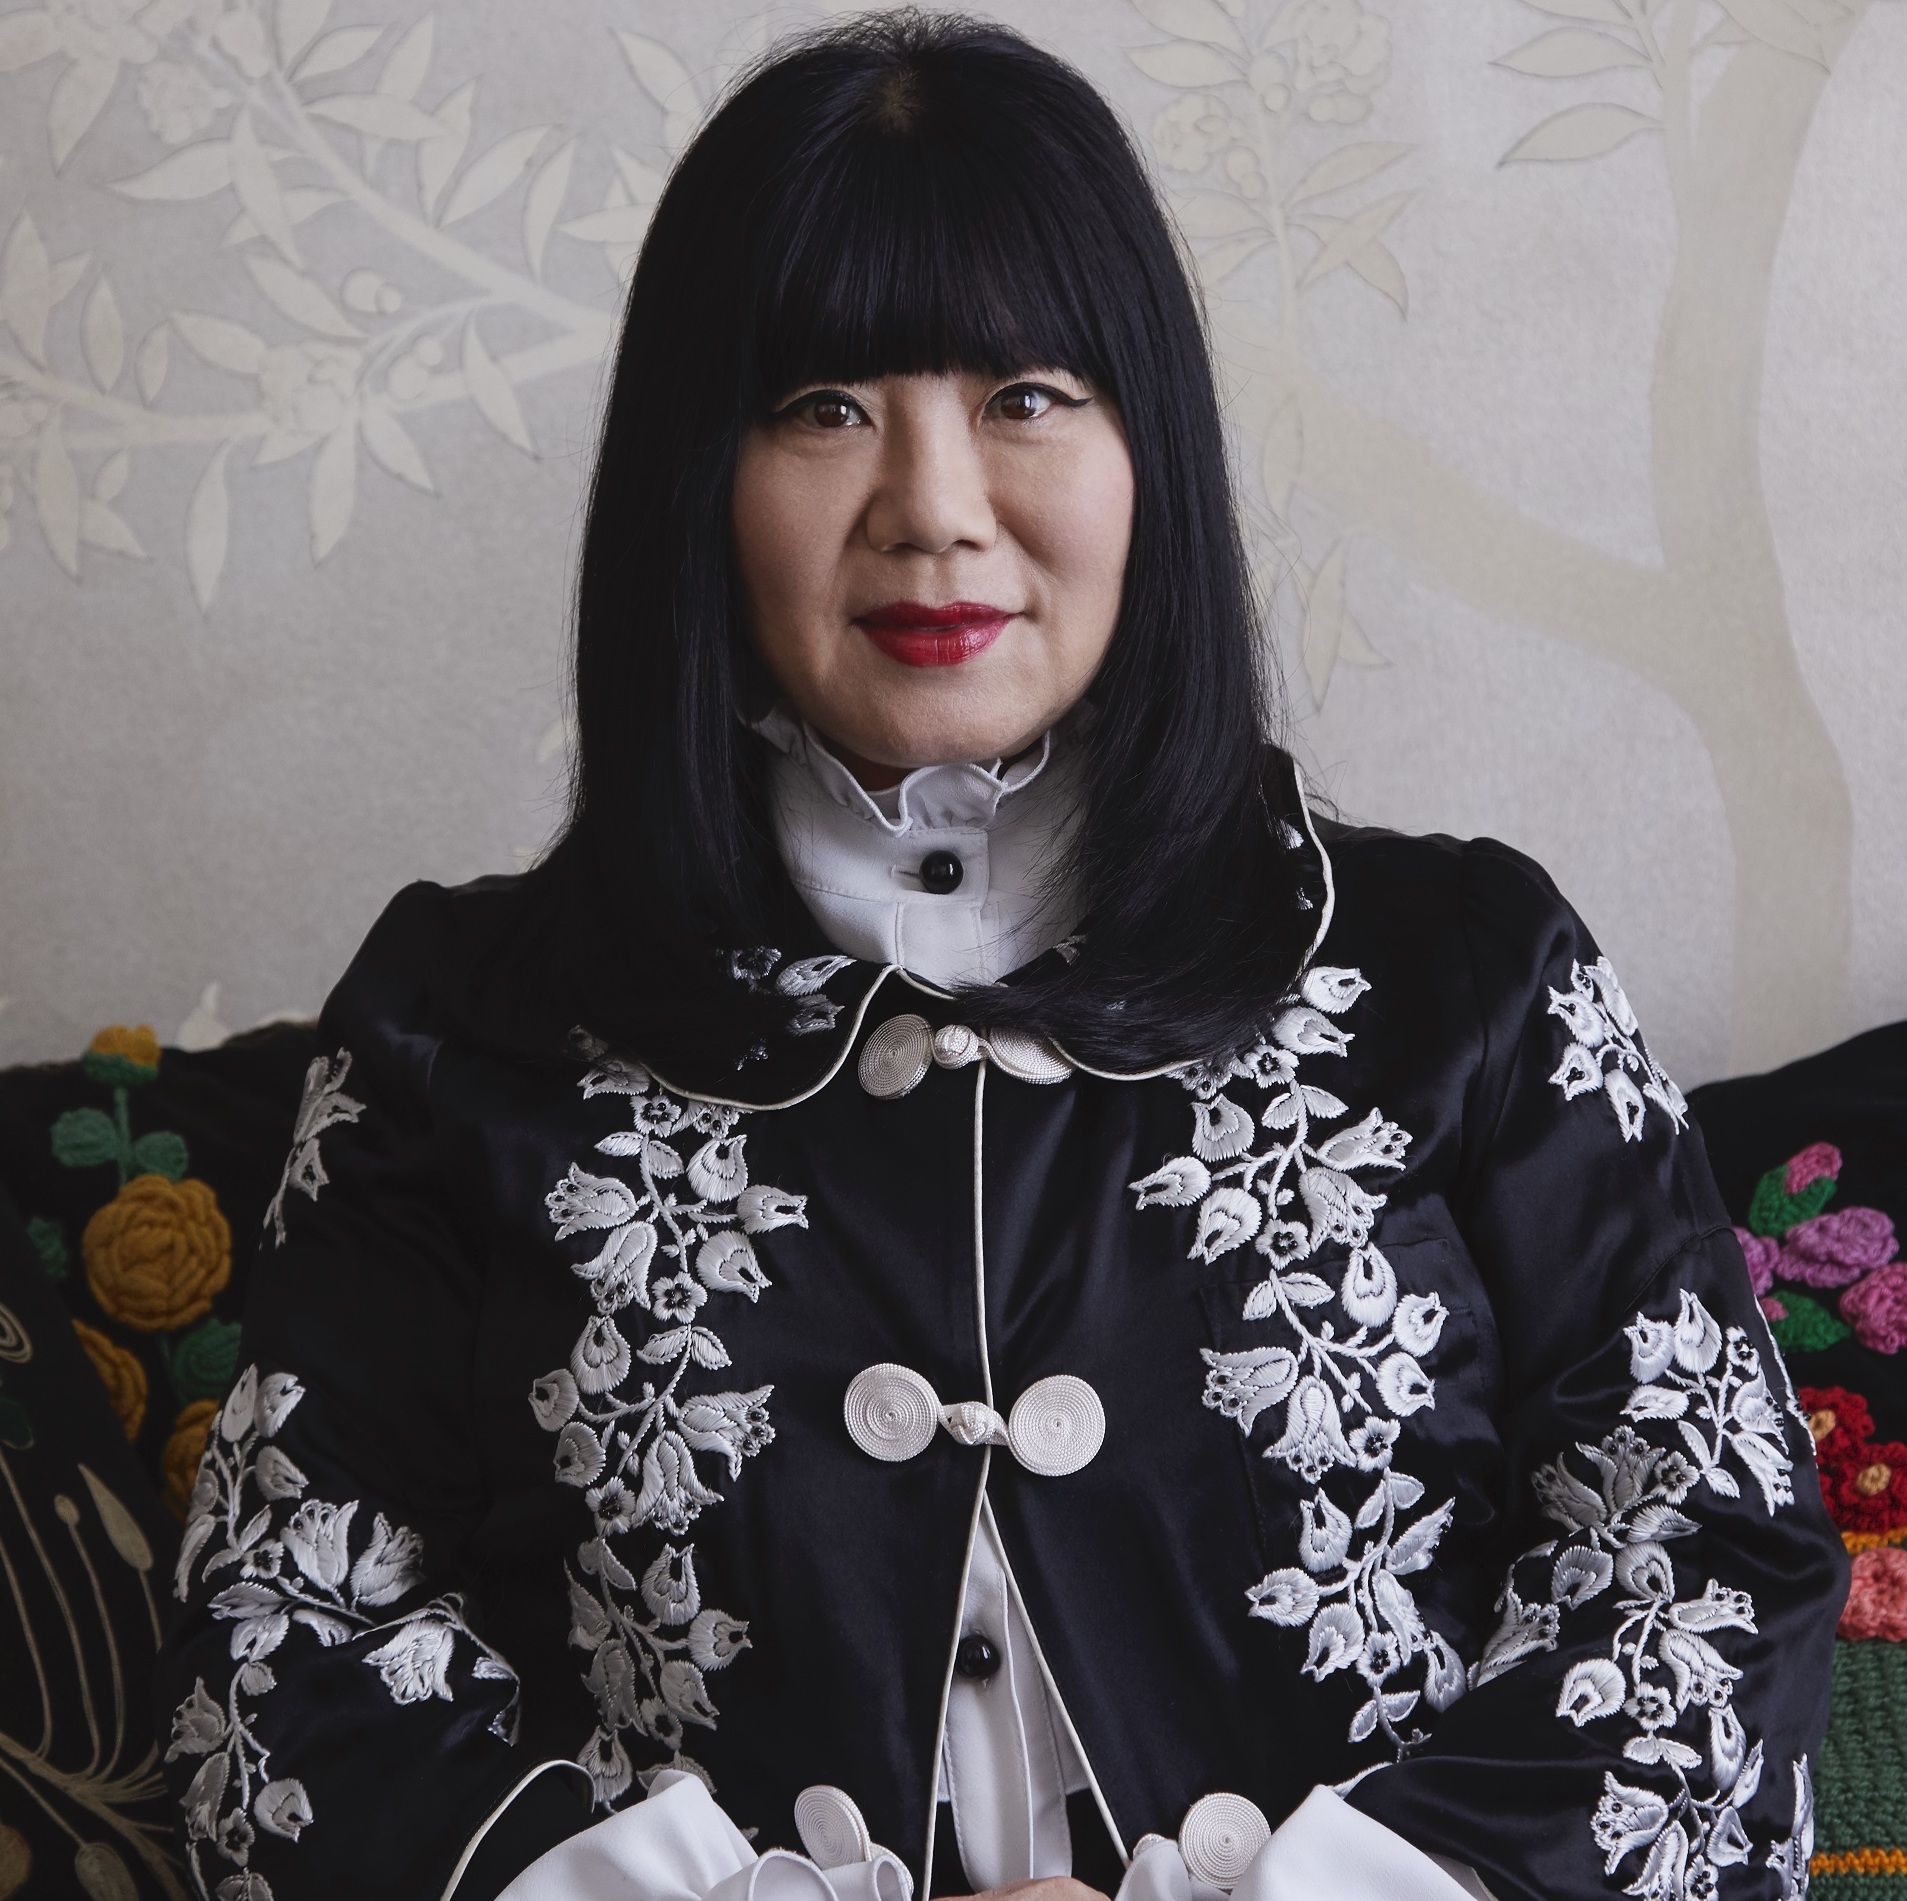 Inside Anna Sui’s World | Museum of Arts and Design